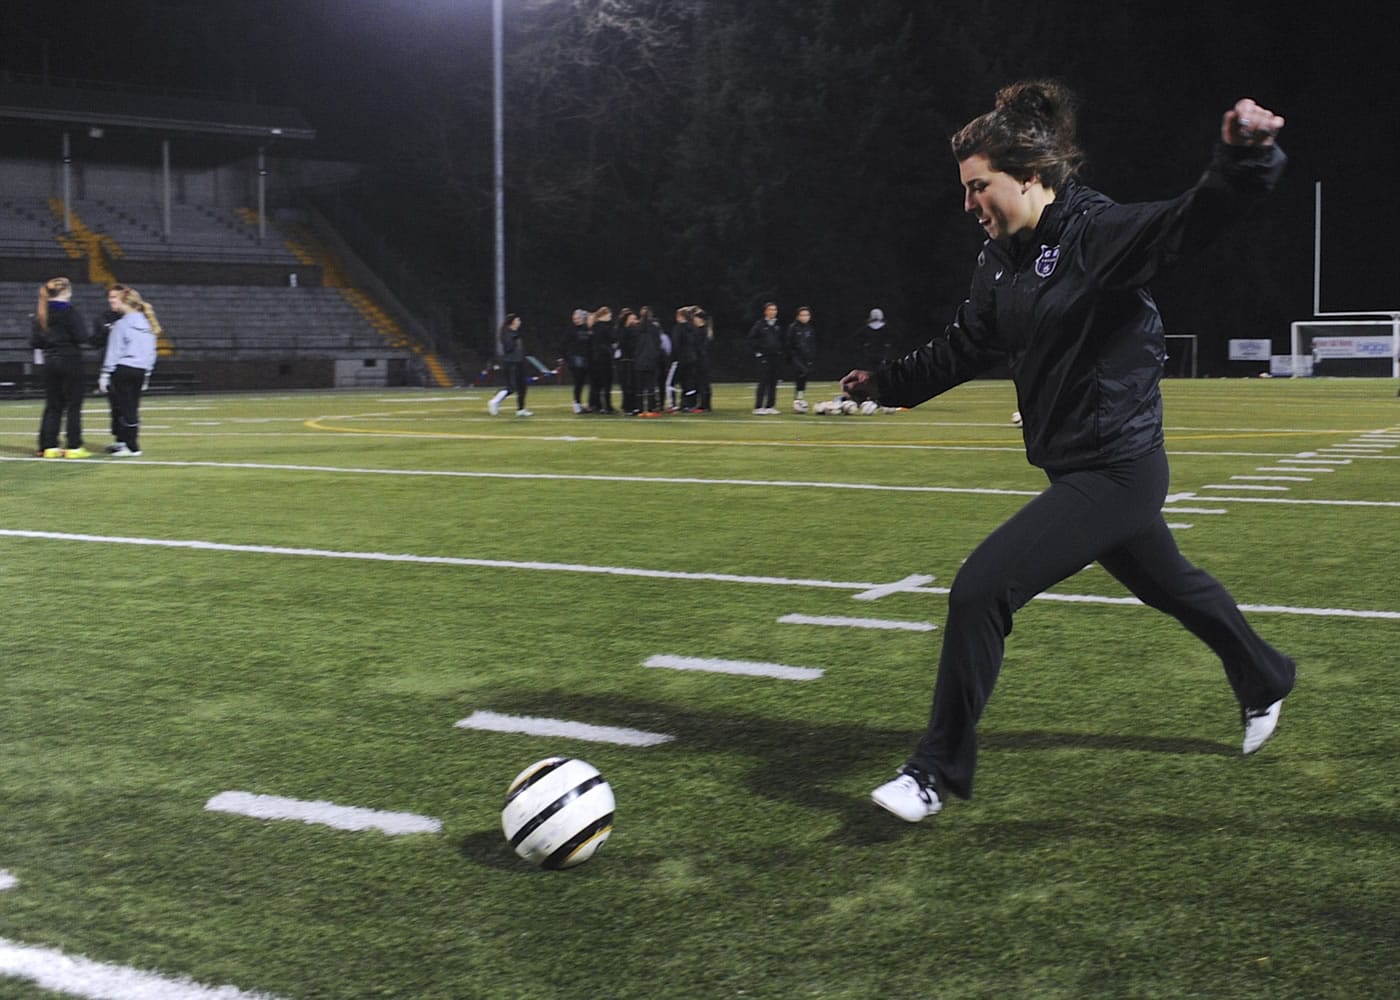 Marion Lilly of the Columbia River Girls Soccer team as they train for state at Kiggins Bowl in Vancouver Wa., Wednesday Nov.,19, 2014.